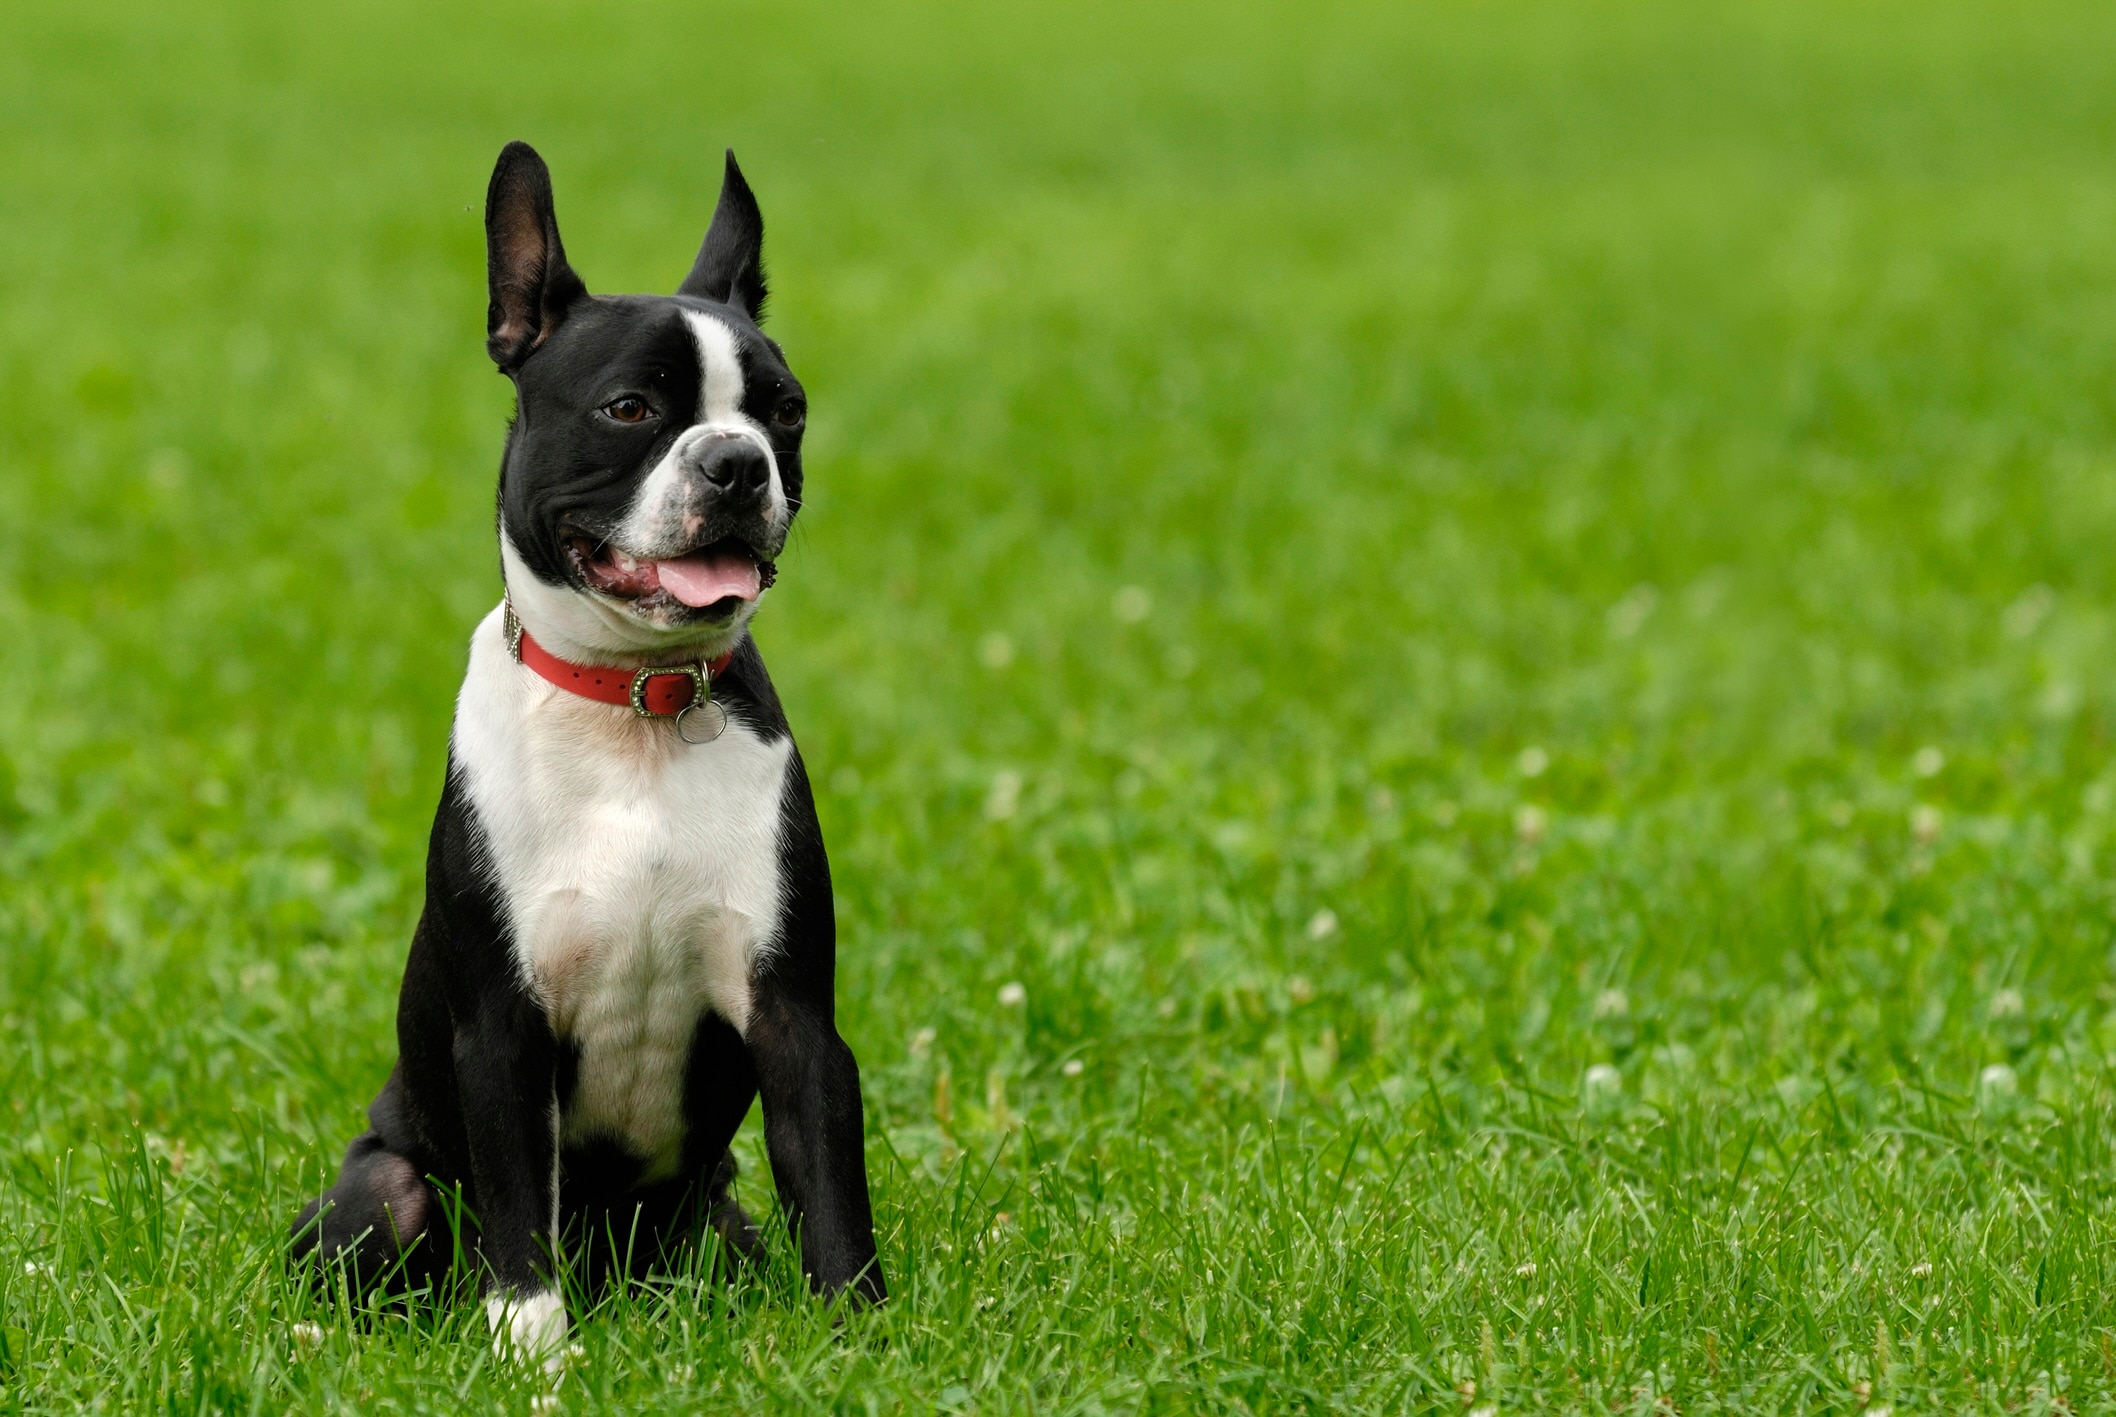 black and white boston terrier wearing a red collar sitting in grass and panting